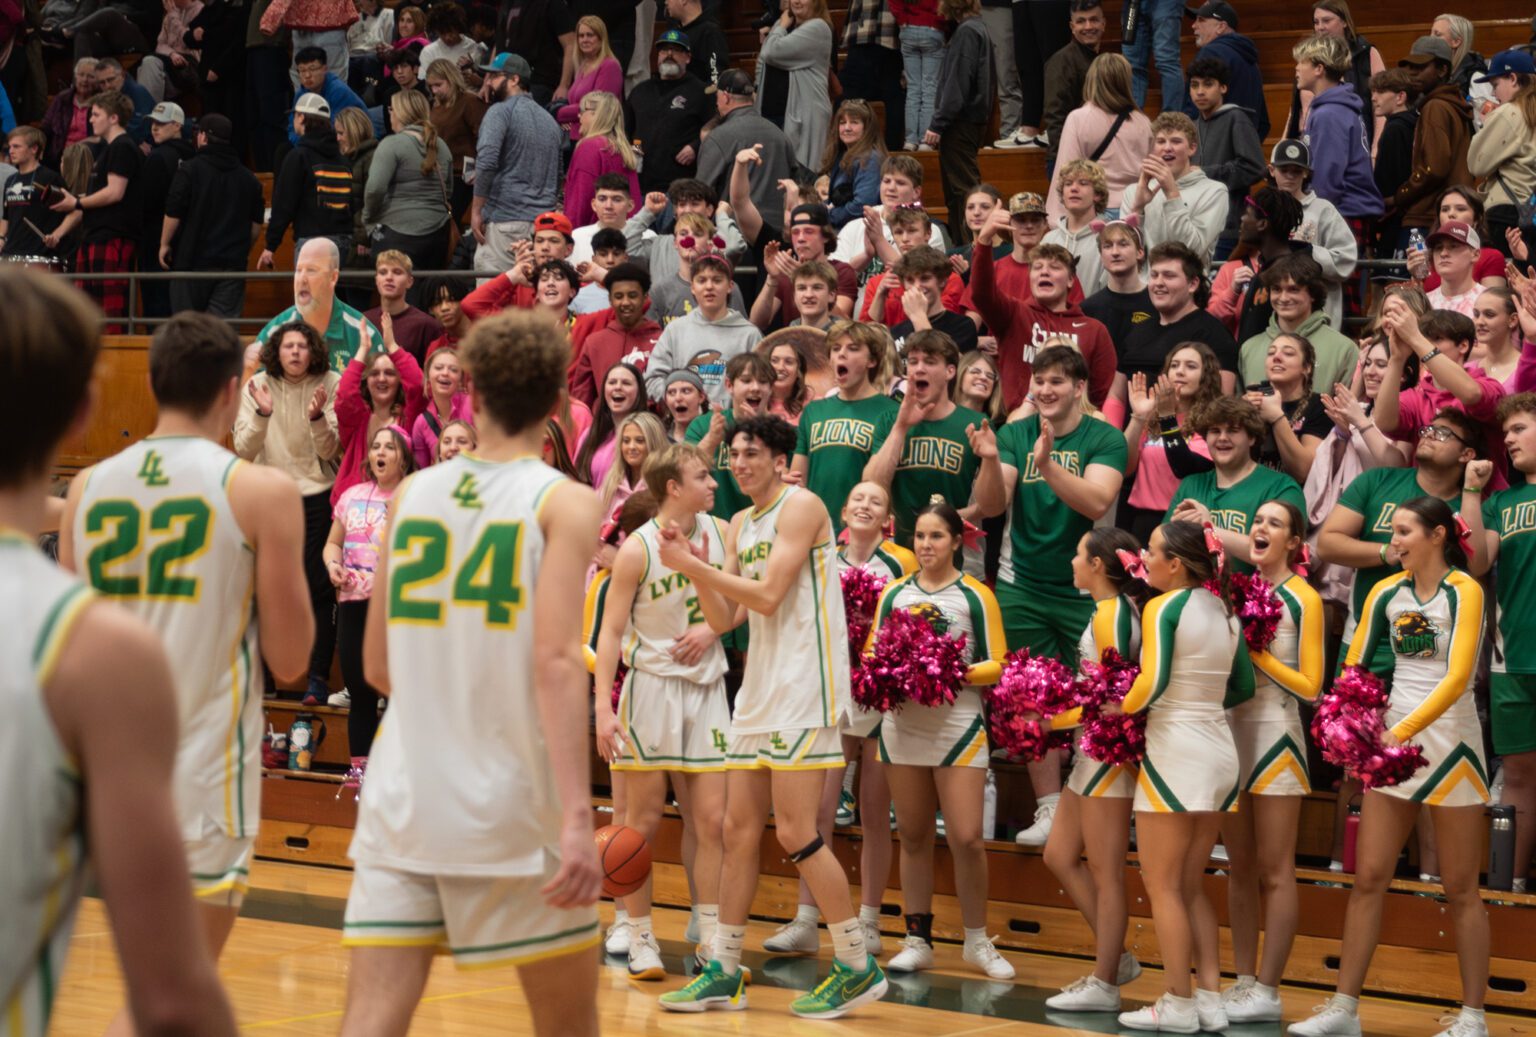 Lynden and its student section celebrate a 64-43 win over Cedarcrest Wednesday, Feb. 14 in the 2A District 1 championship game at Mount Vernon High School.